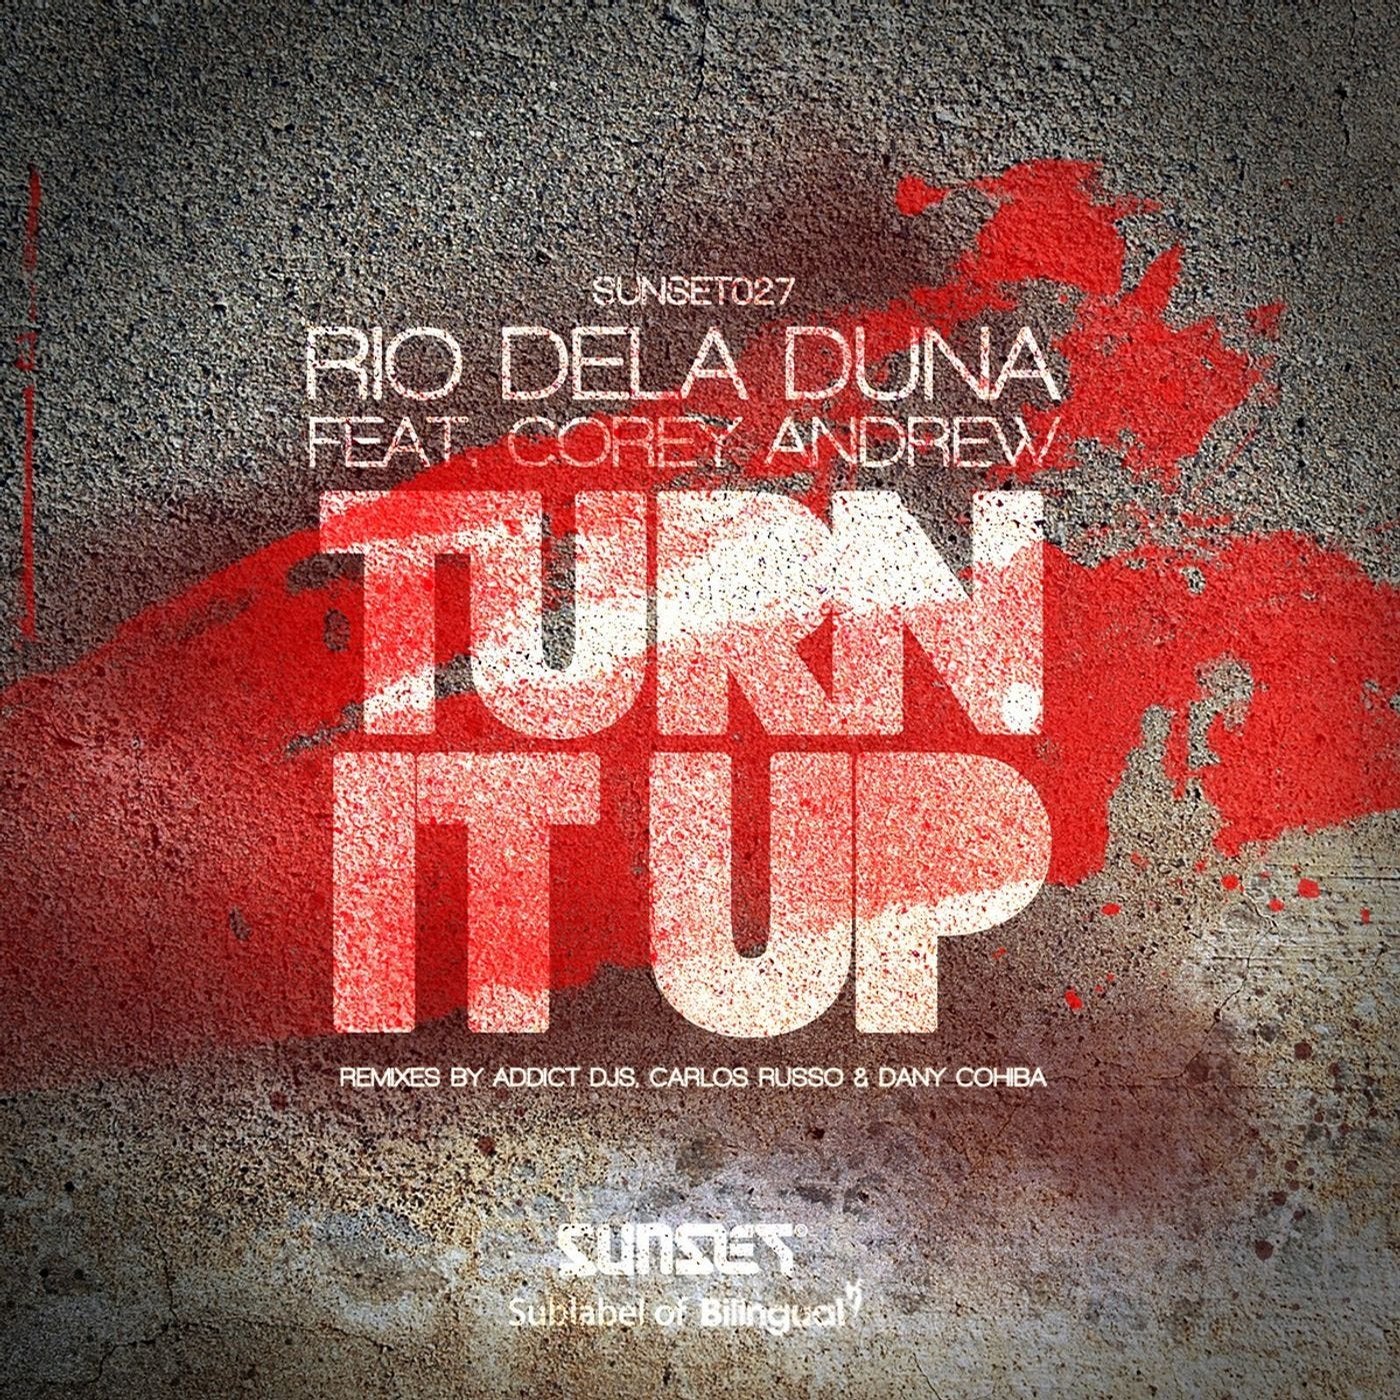 Turn it up (Remixes). Frankenin it up Dany. Rio up.